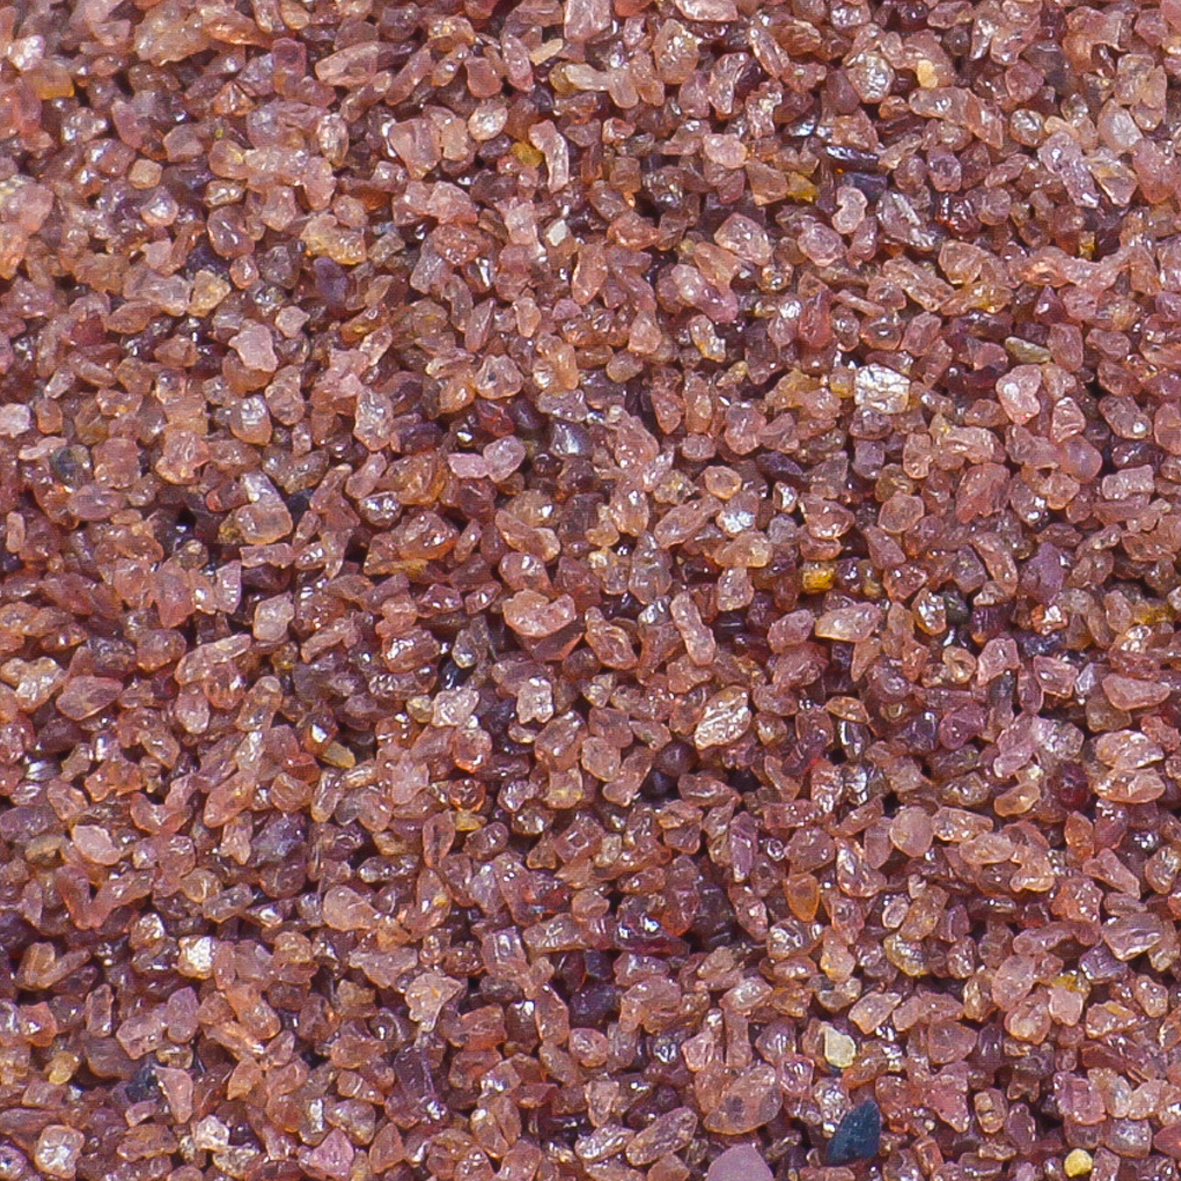 A mix of small, red shiny minerals